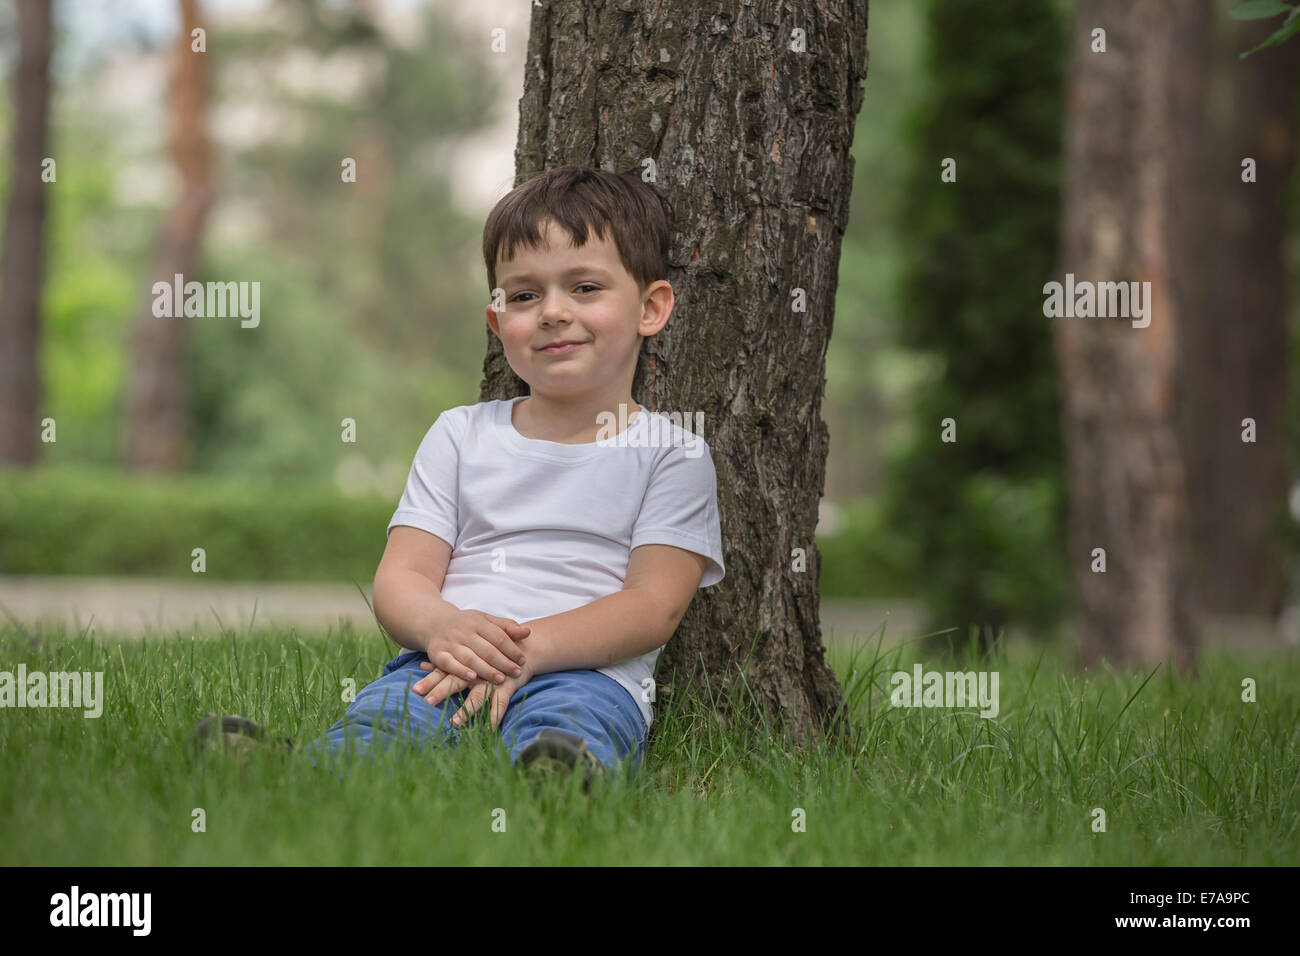 Portrait of cute boy relaxing against tree in park Stock Photo